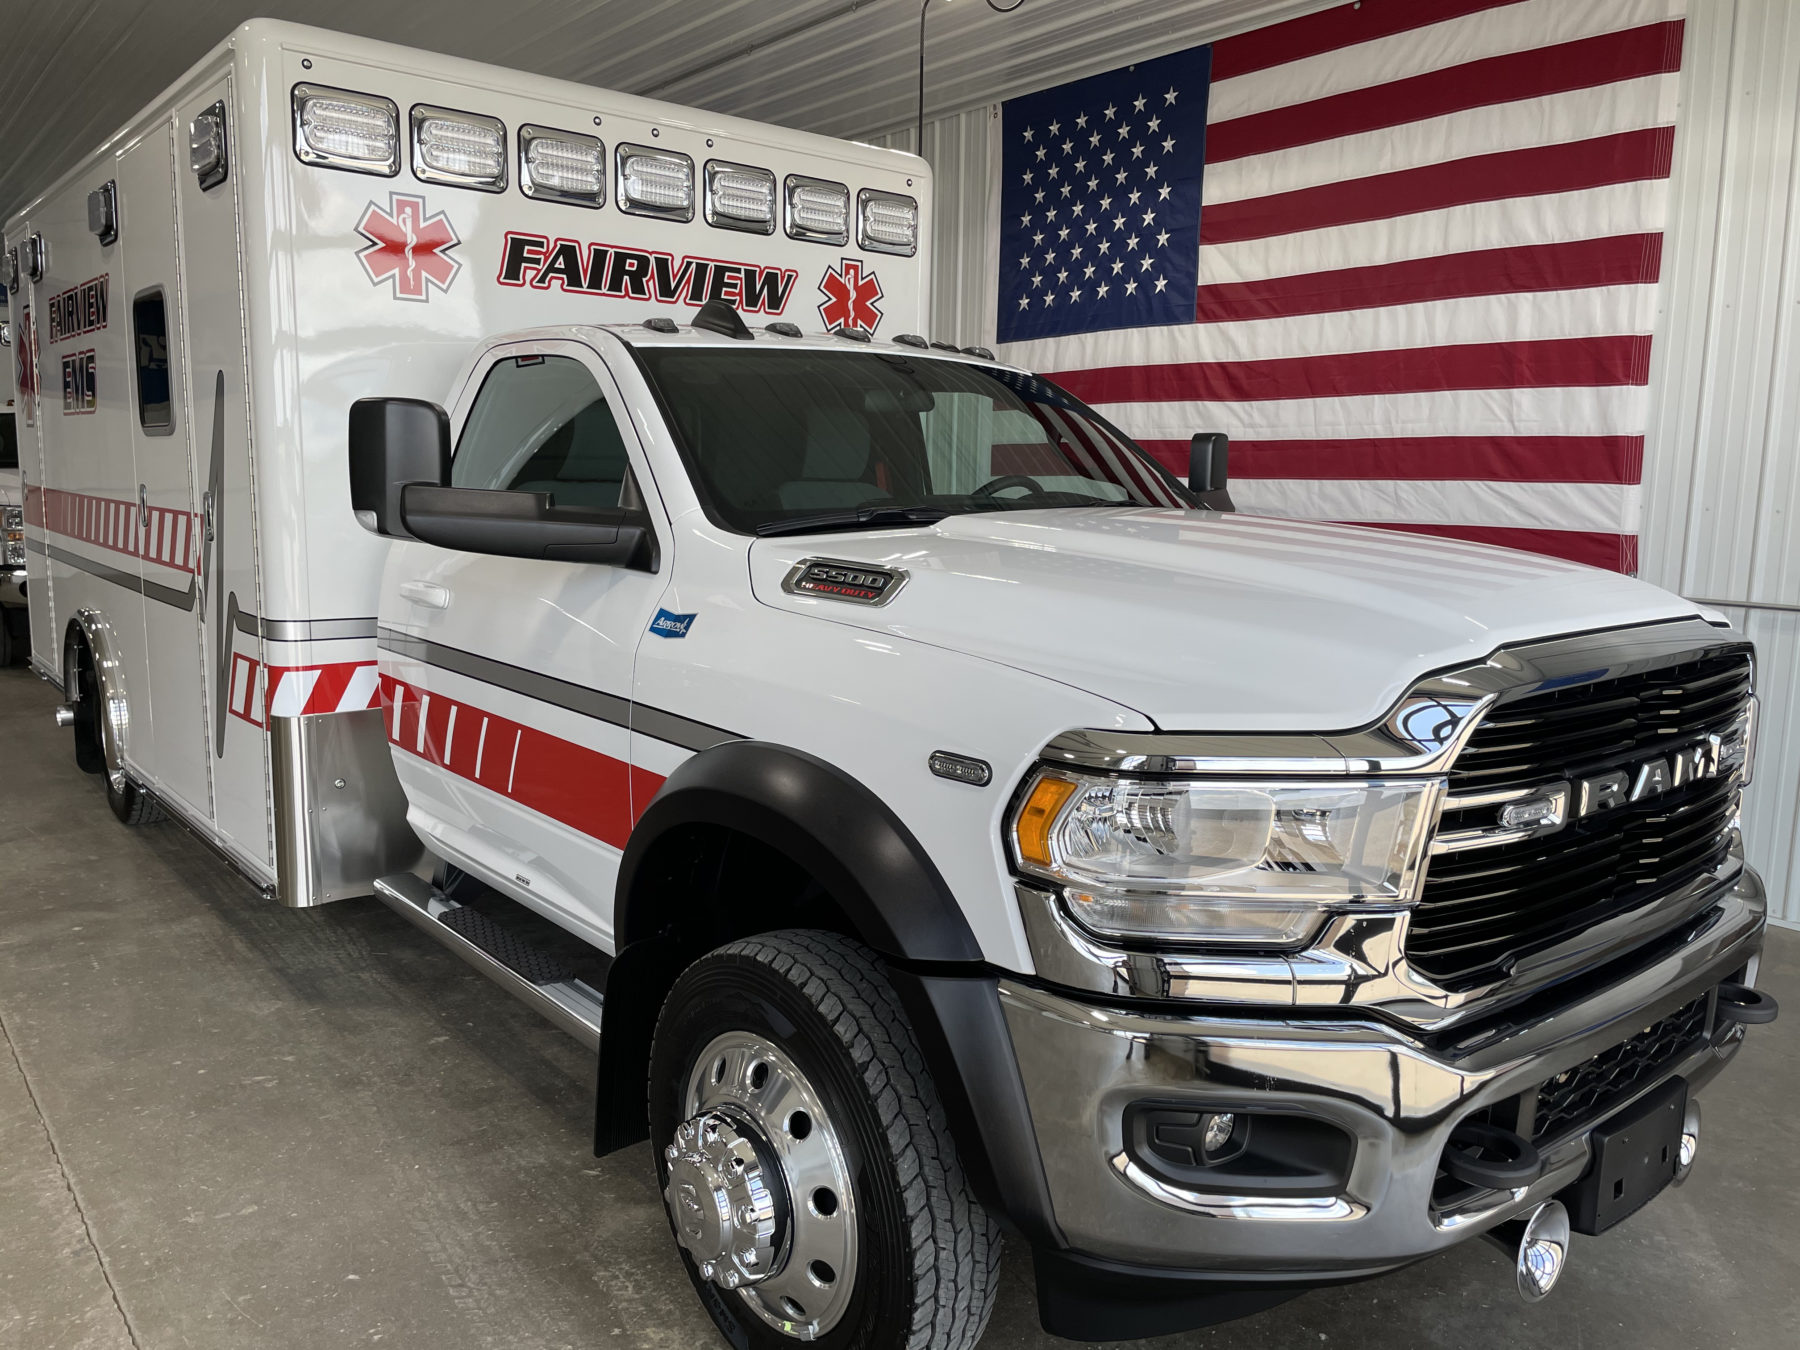 2021 Ram 5500 4x4 Heavy Duty Ambulance For Sale – Picture 1